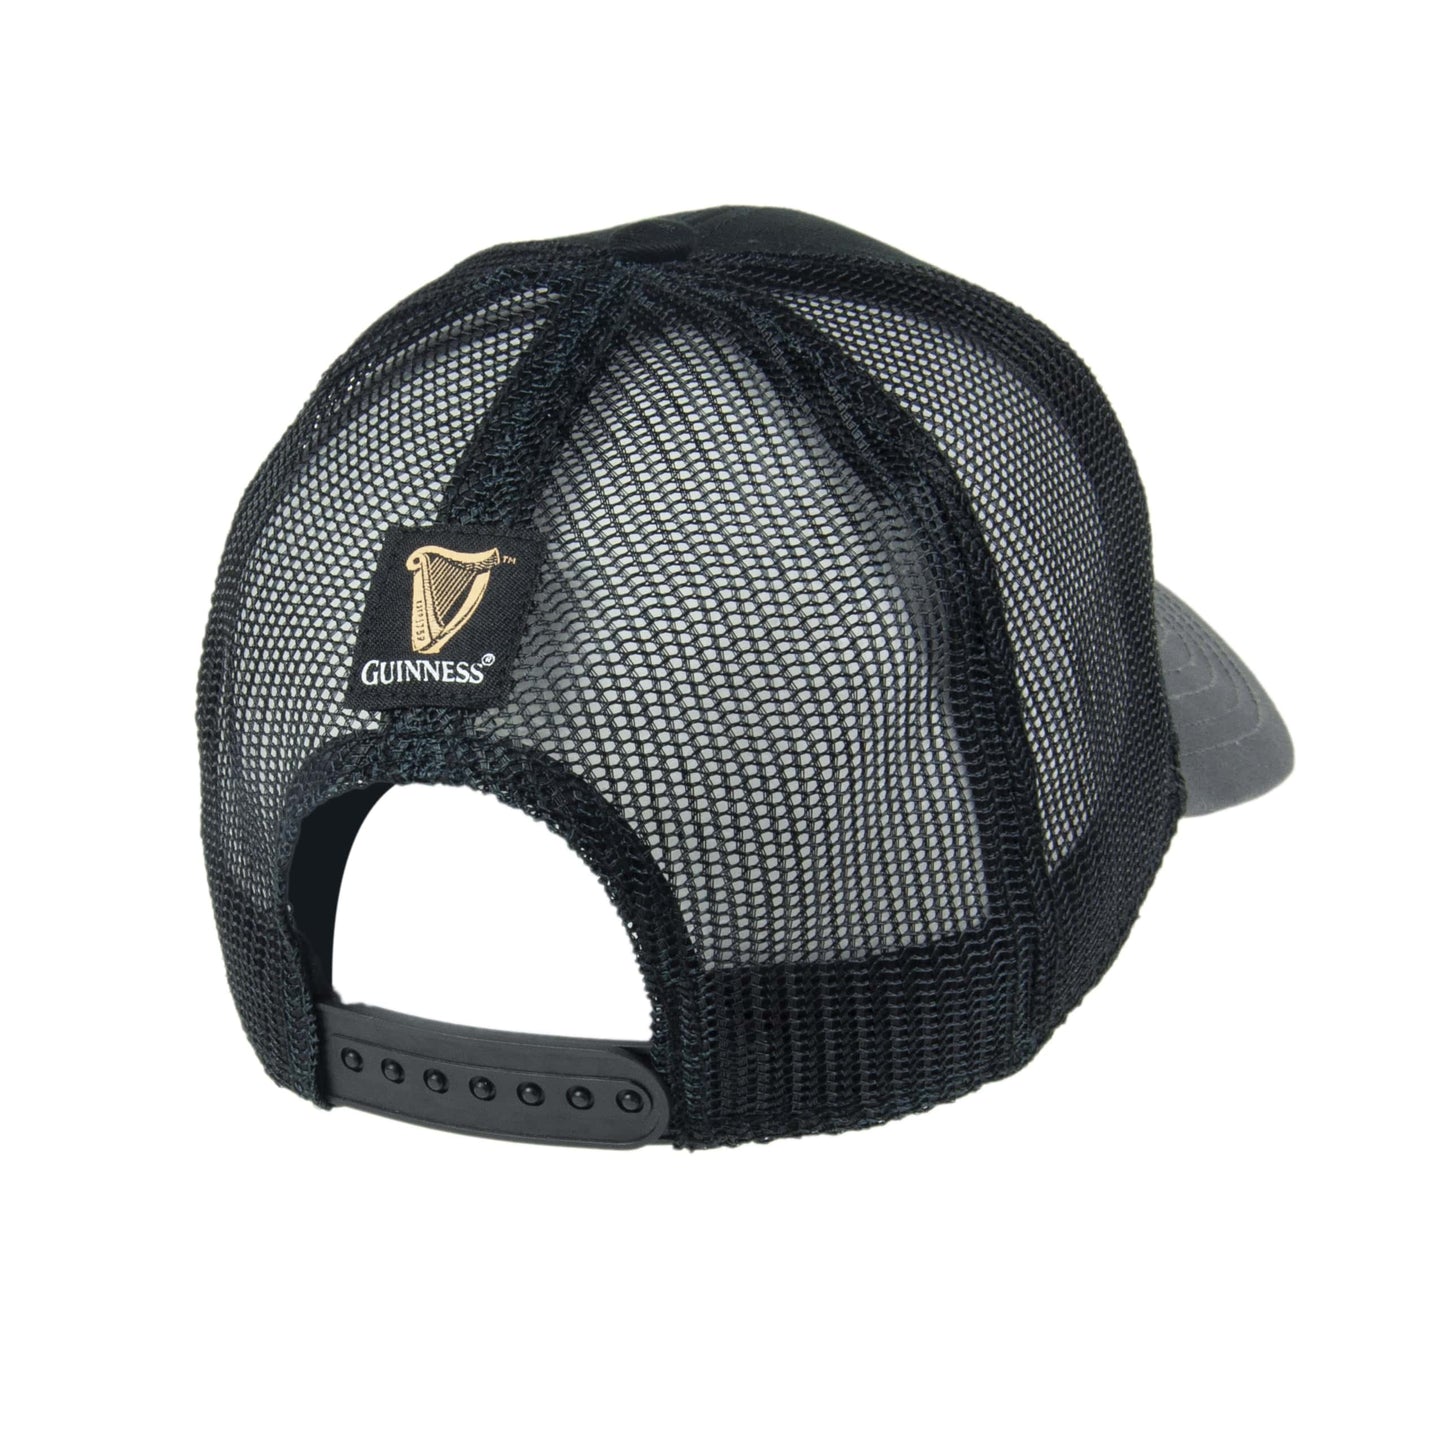 The Guinness UK trucker hat in black and gold is an embroidered cap made of cotton.